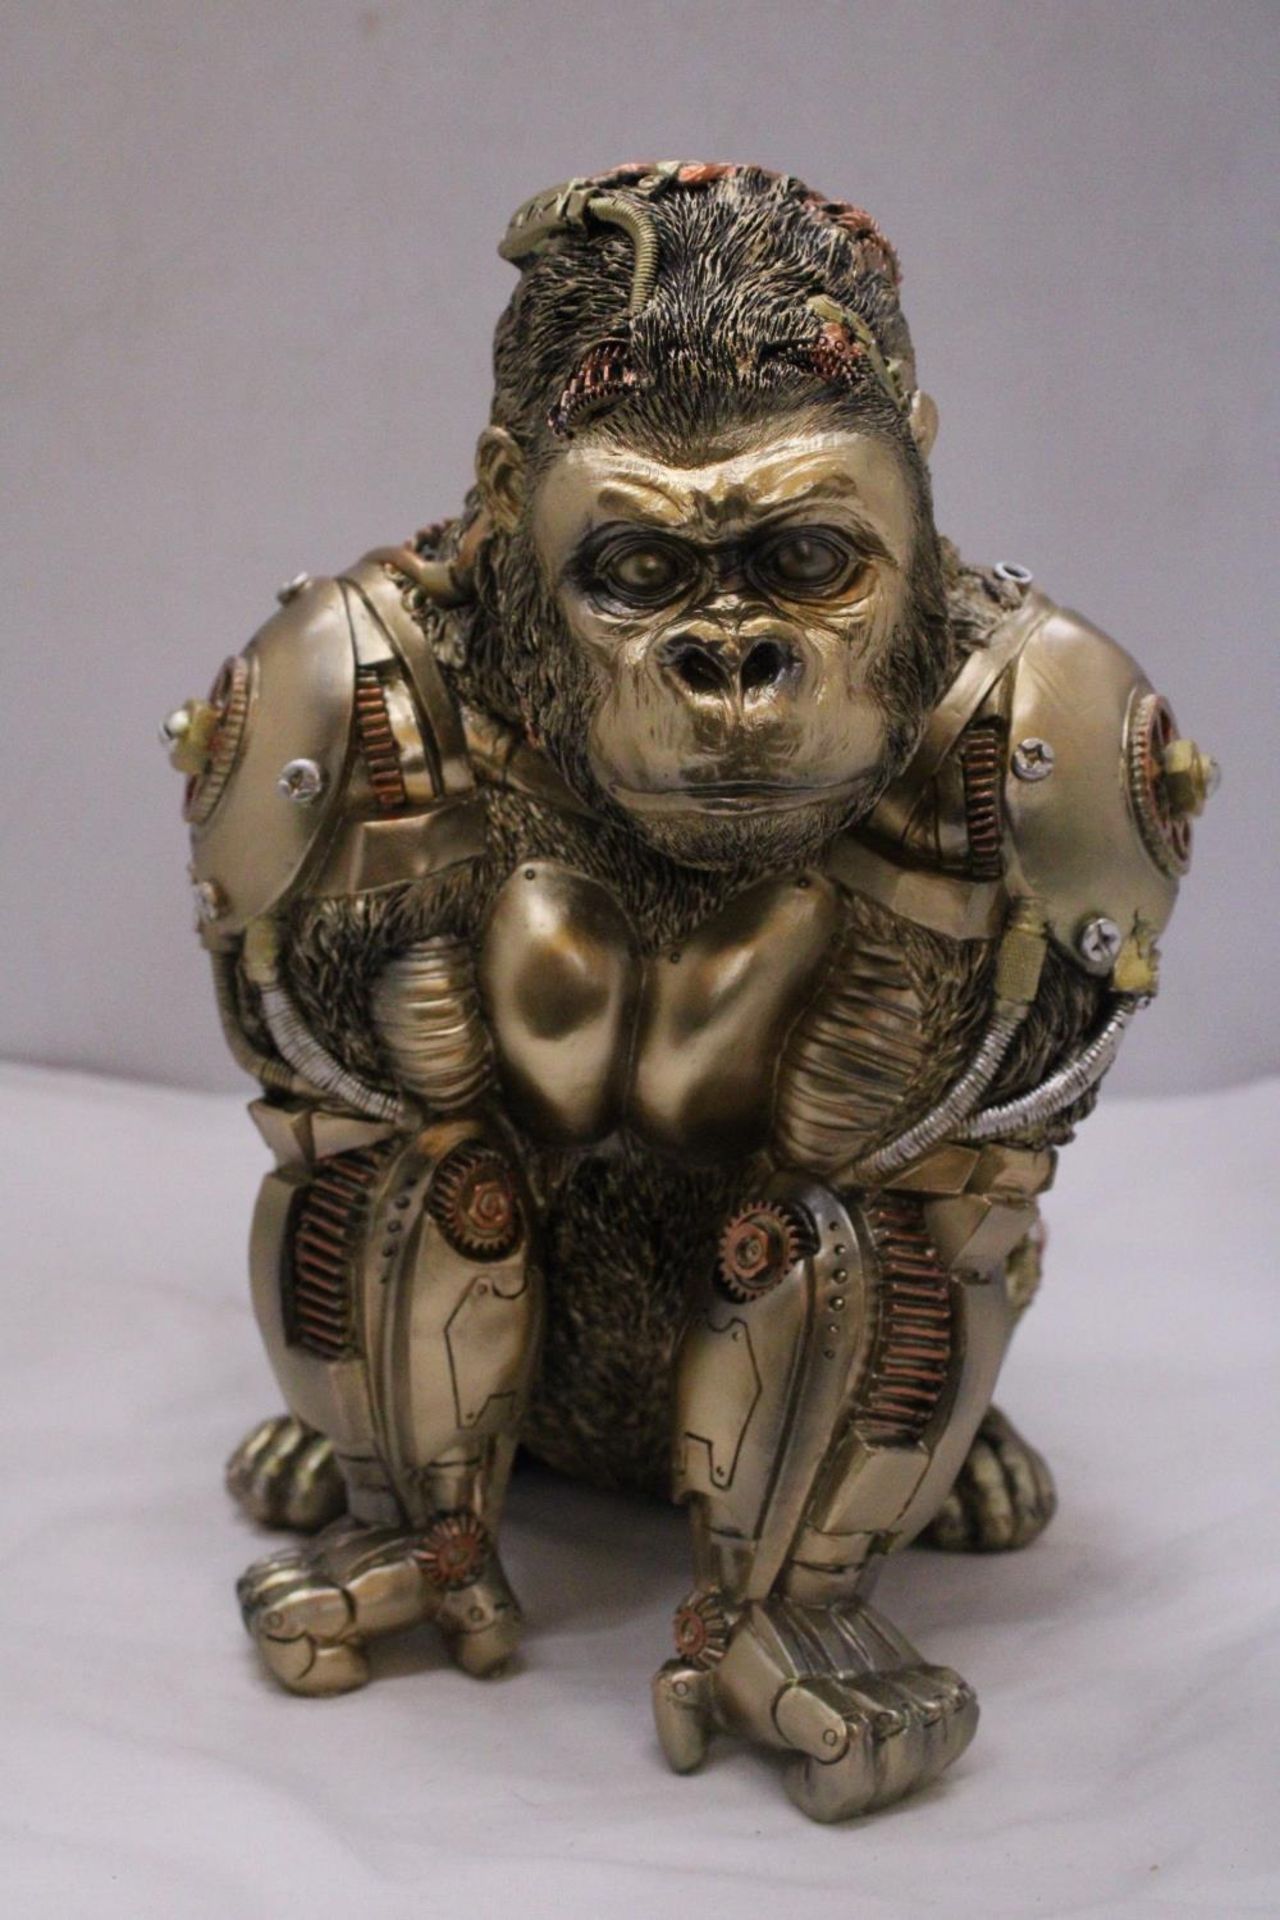 A MECHANICAL STYLE GORILLA - Image 2 of 5